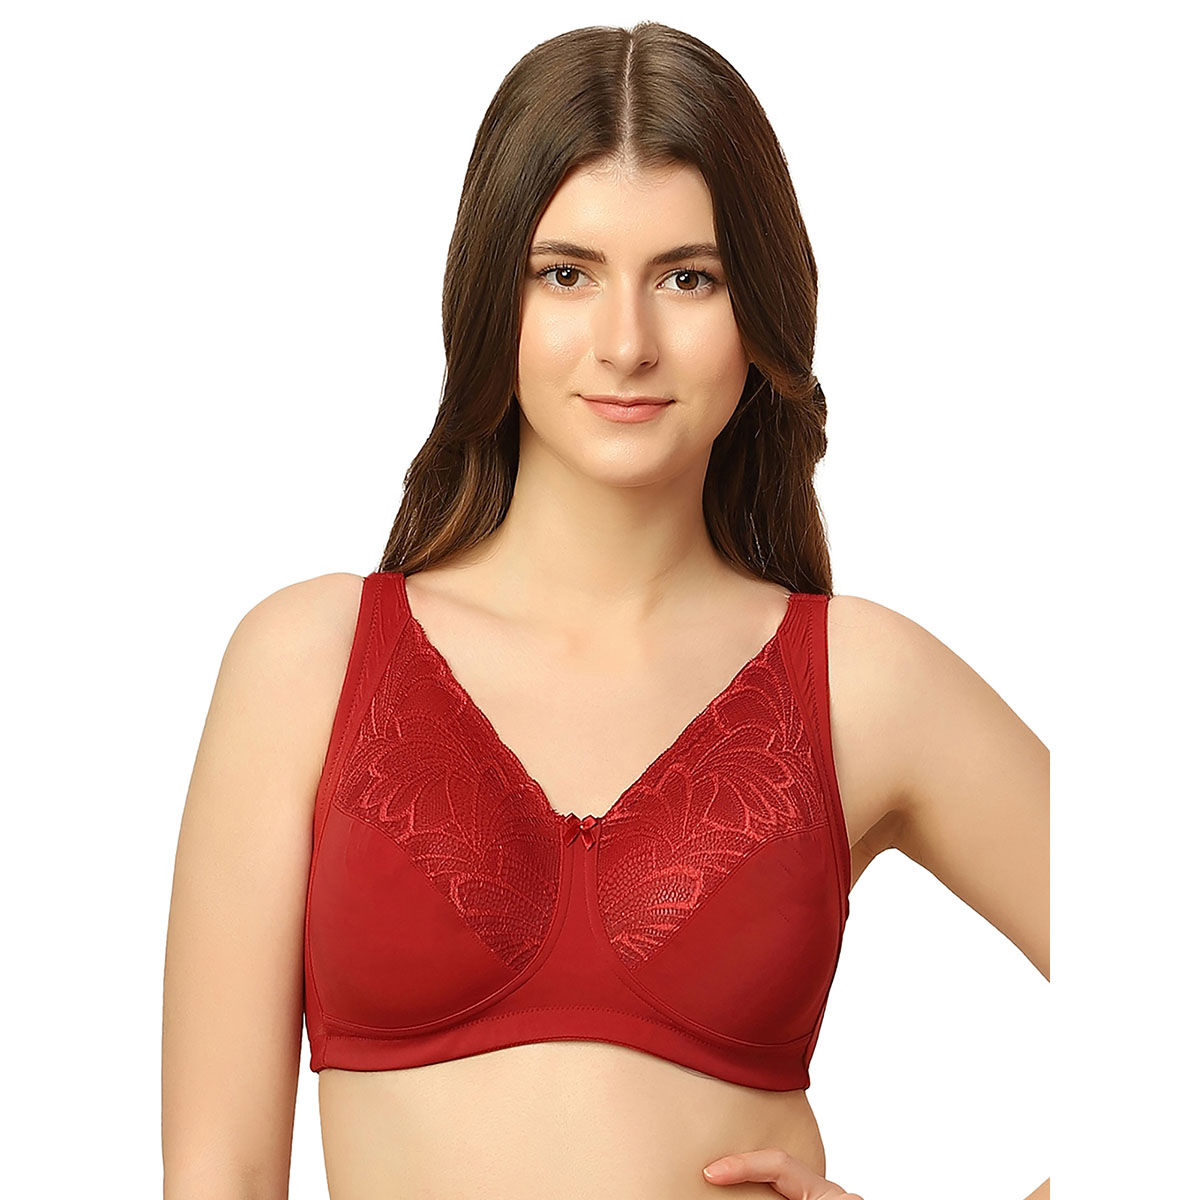 rosyclo Full Back Coverage Bras for Women, Fashion Deep Cup Hide